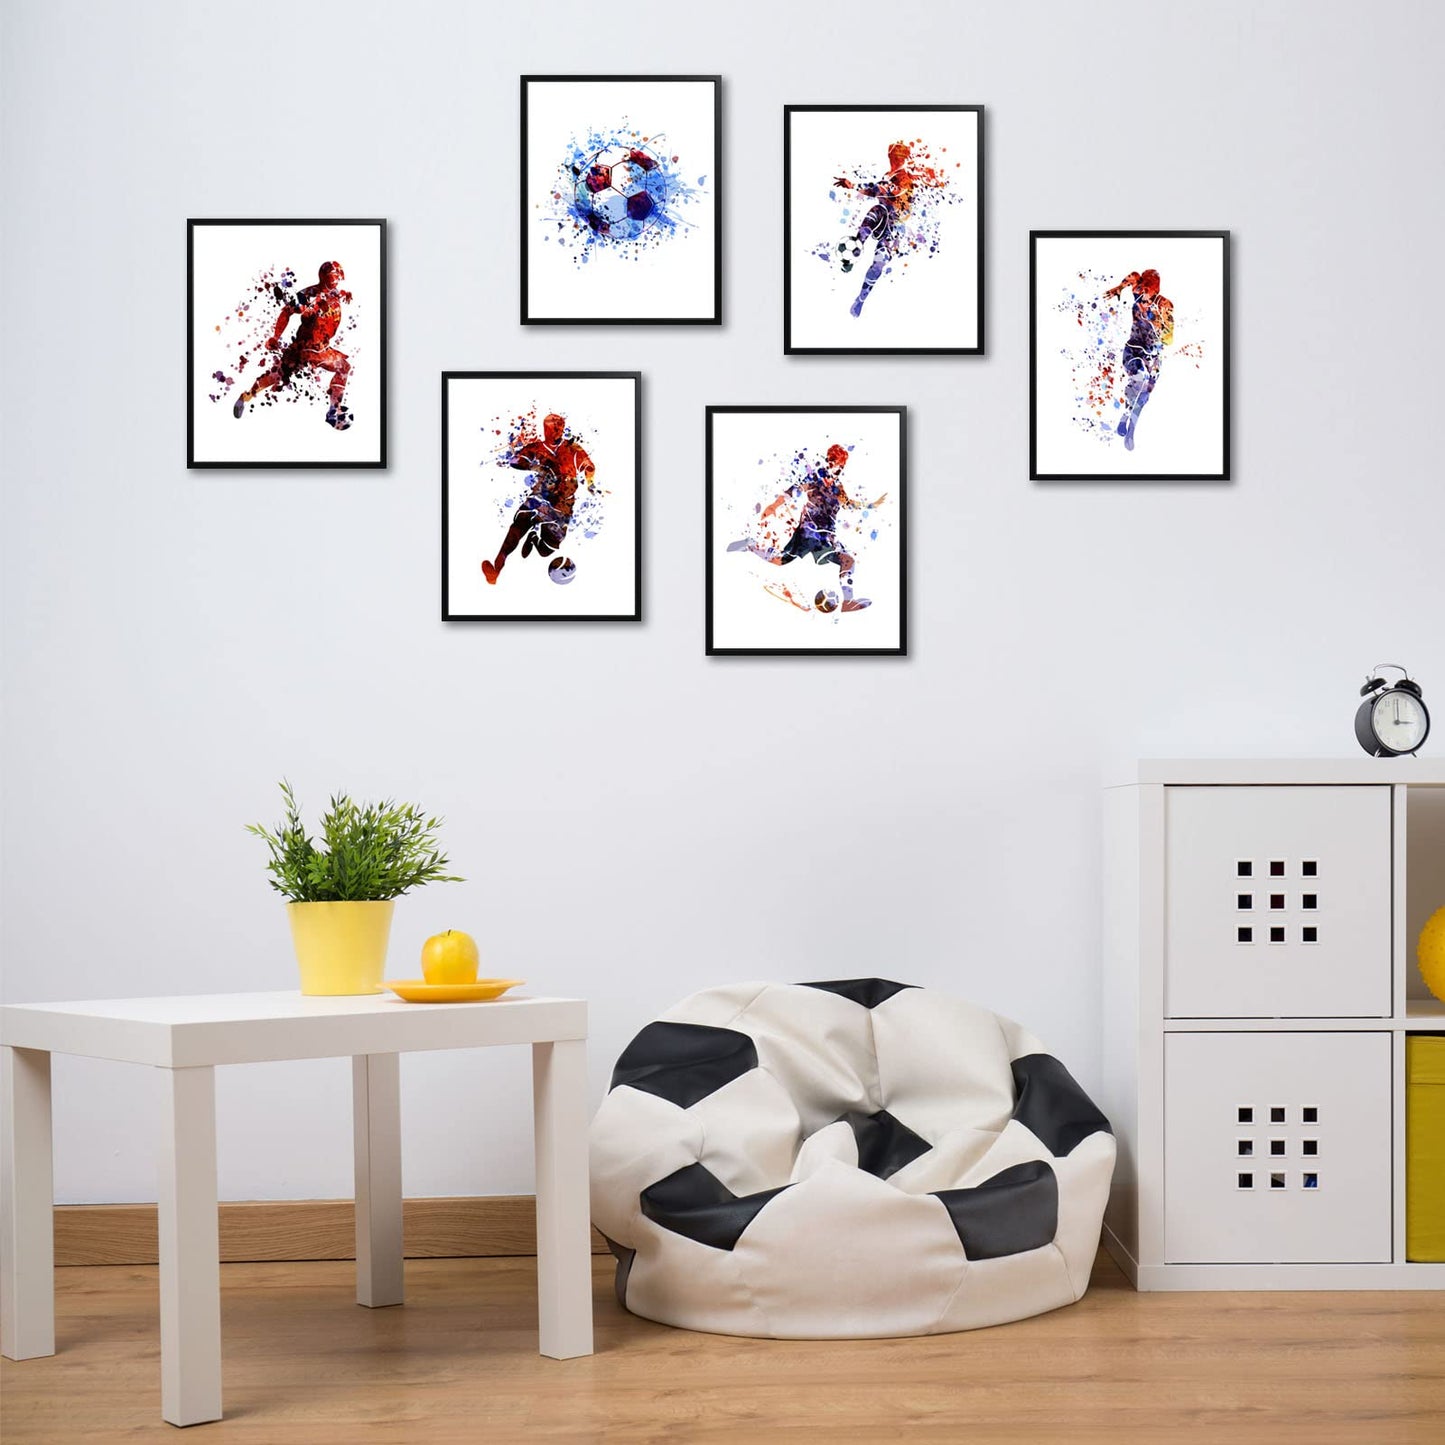 Annande Soccer Players Posters Sport Watercolor Canvas Wall Art Prints Minimalist Pictures for Men Cave Boys Room Decor, 8x10in Unframed